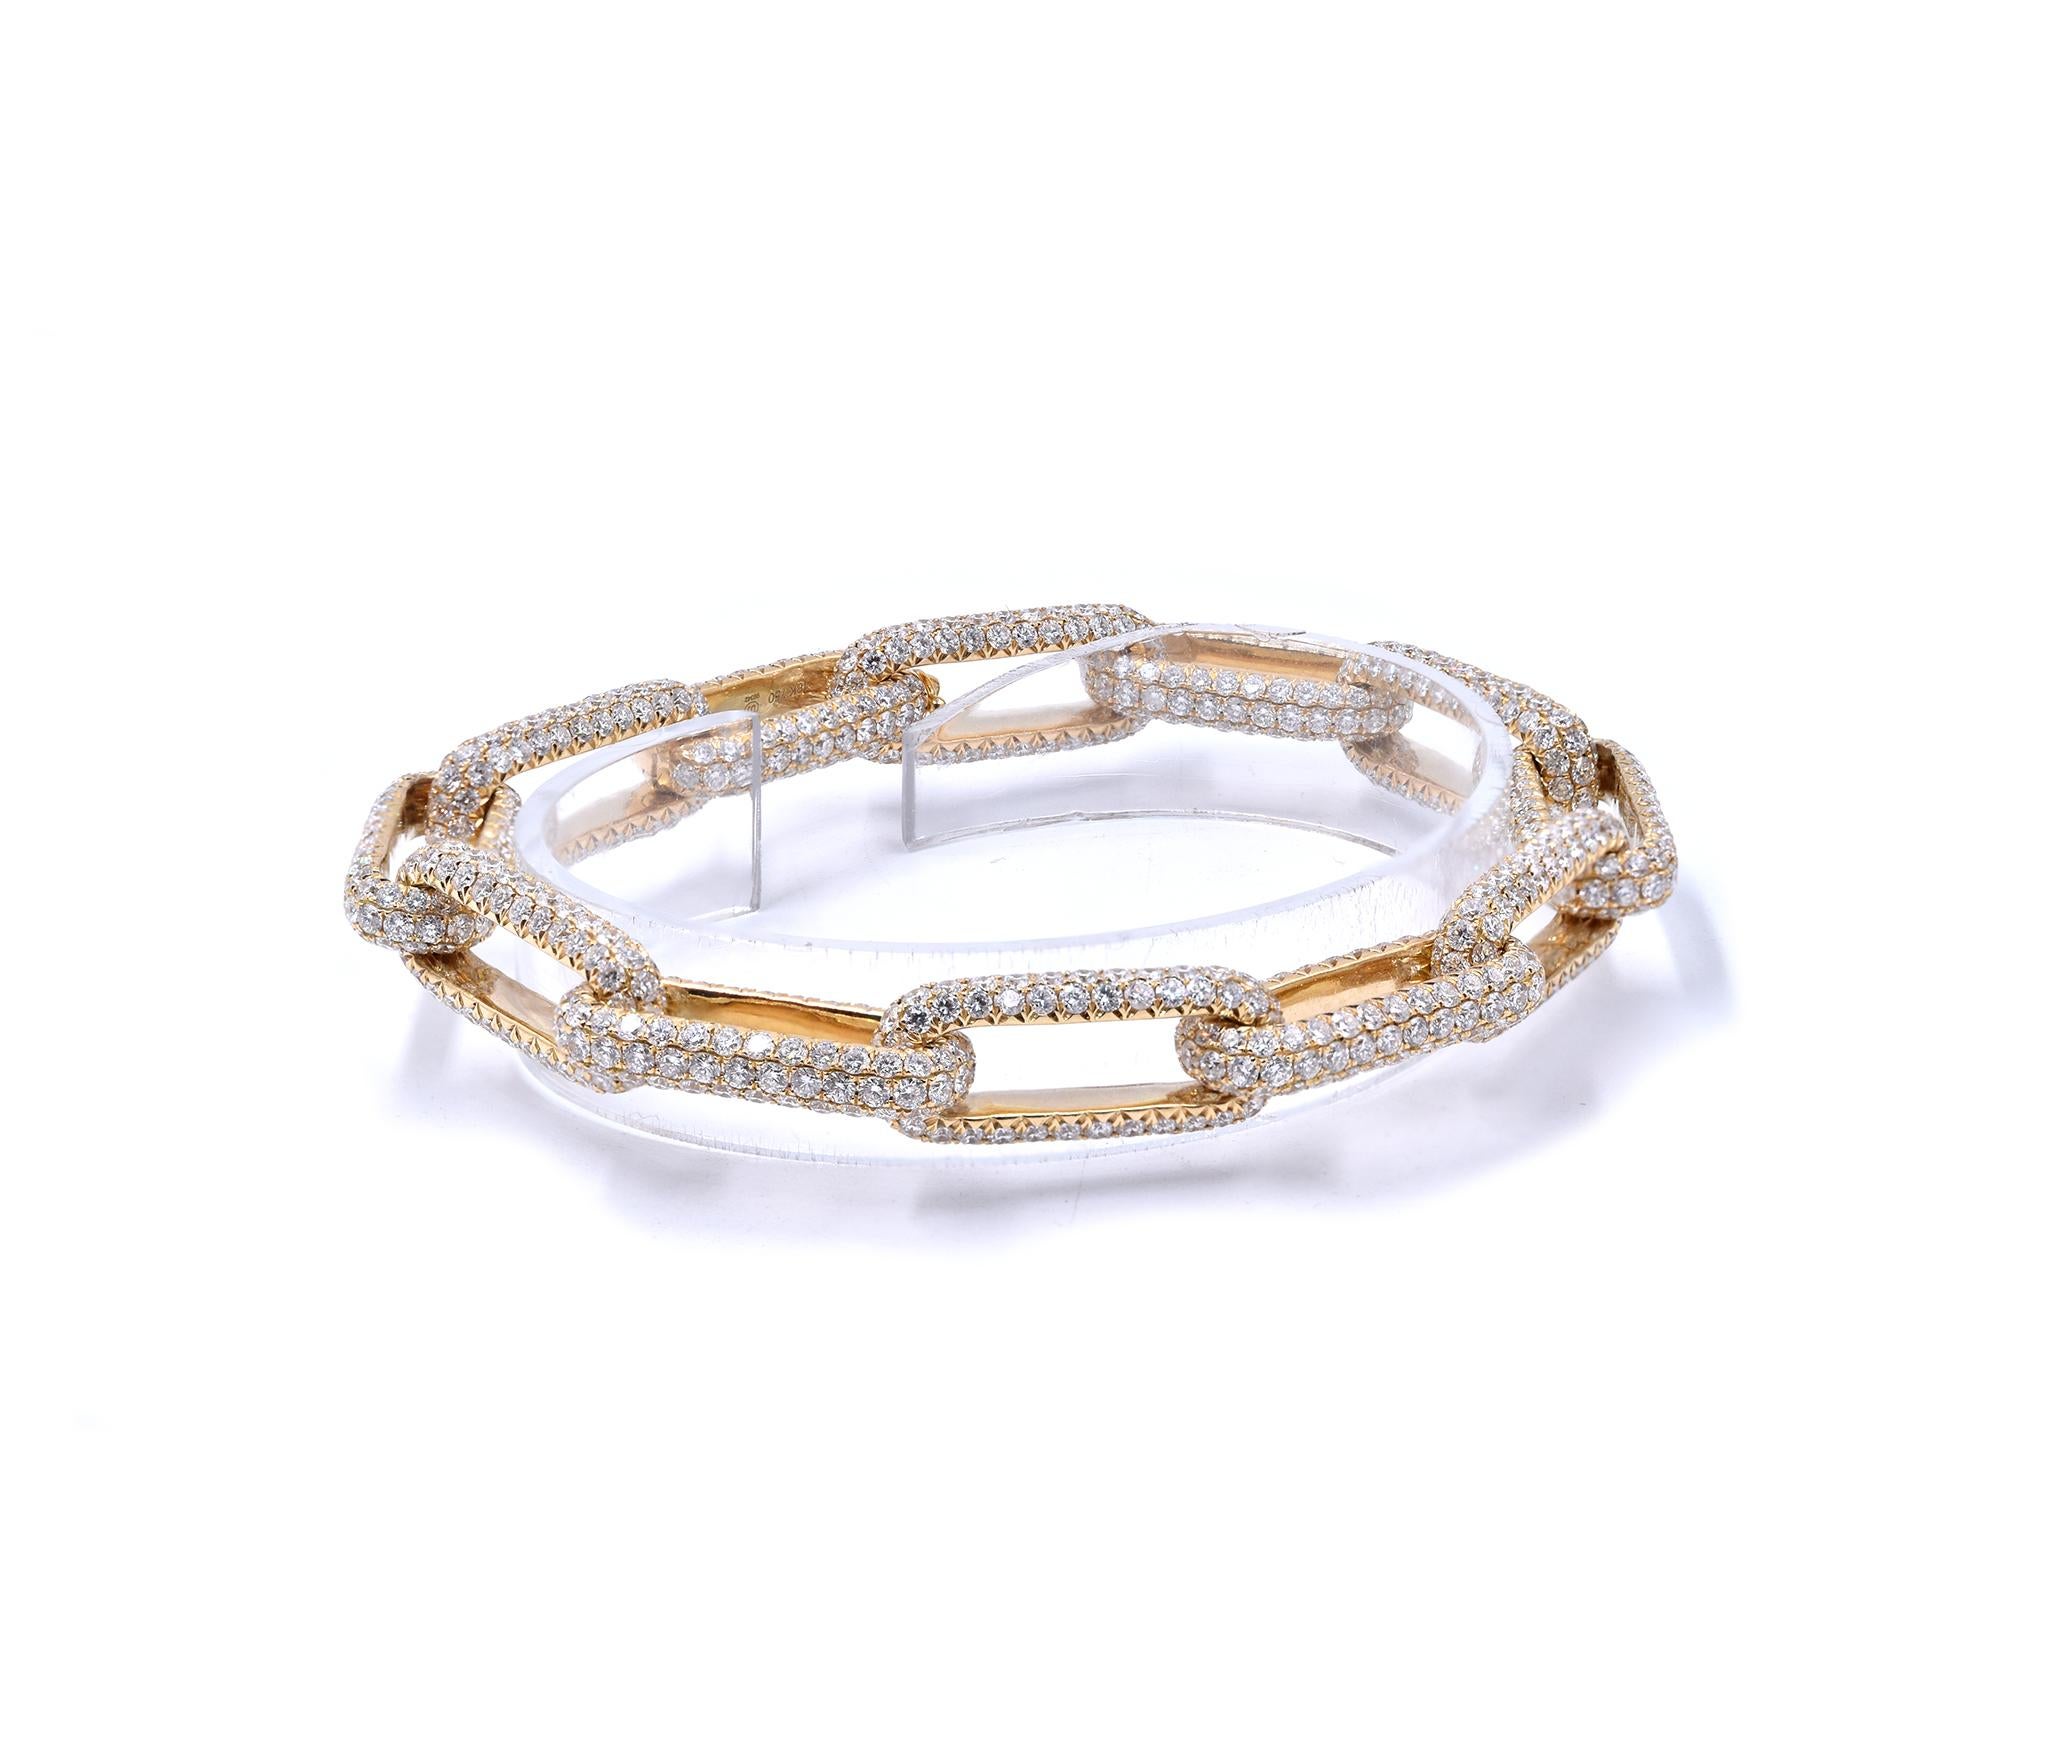 Designer: custom designed 
Material: 18K yellow gold
Diamonds: 1060 round cut = 20.54cttw
Color: G
Clarity: VS2
Dimensions: bracelet will fit a 8.25-inch wrist 
Weight:  35.67 grams
